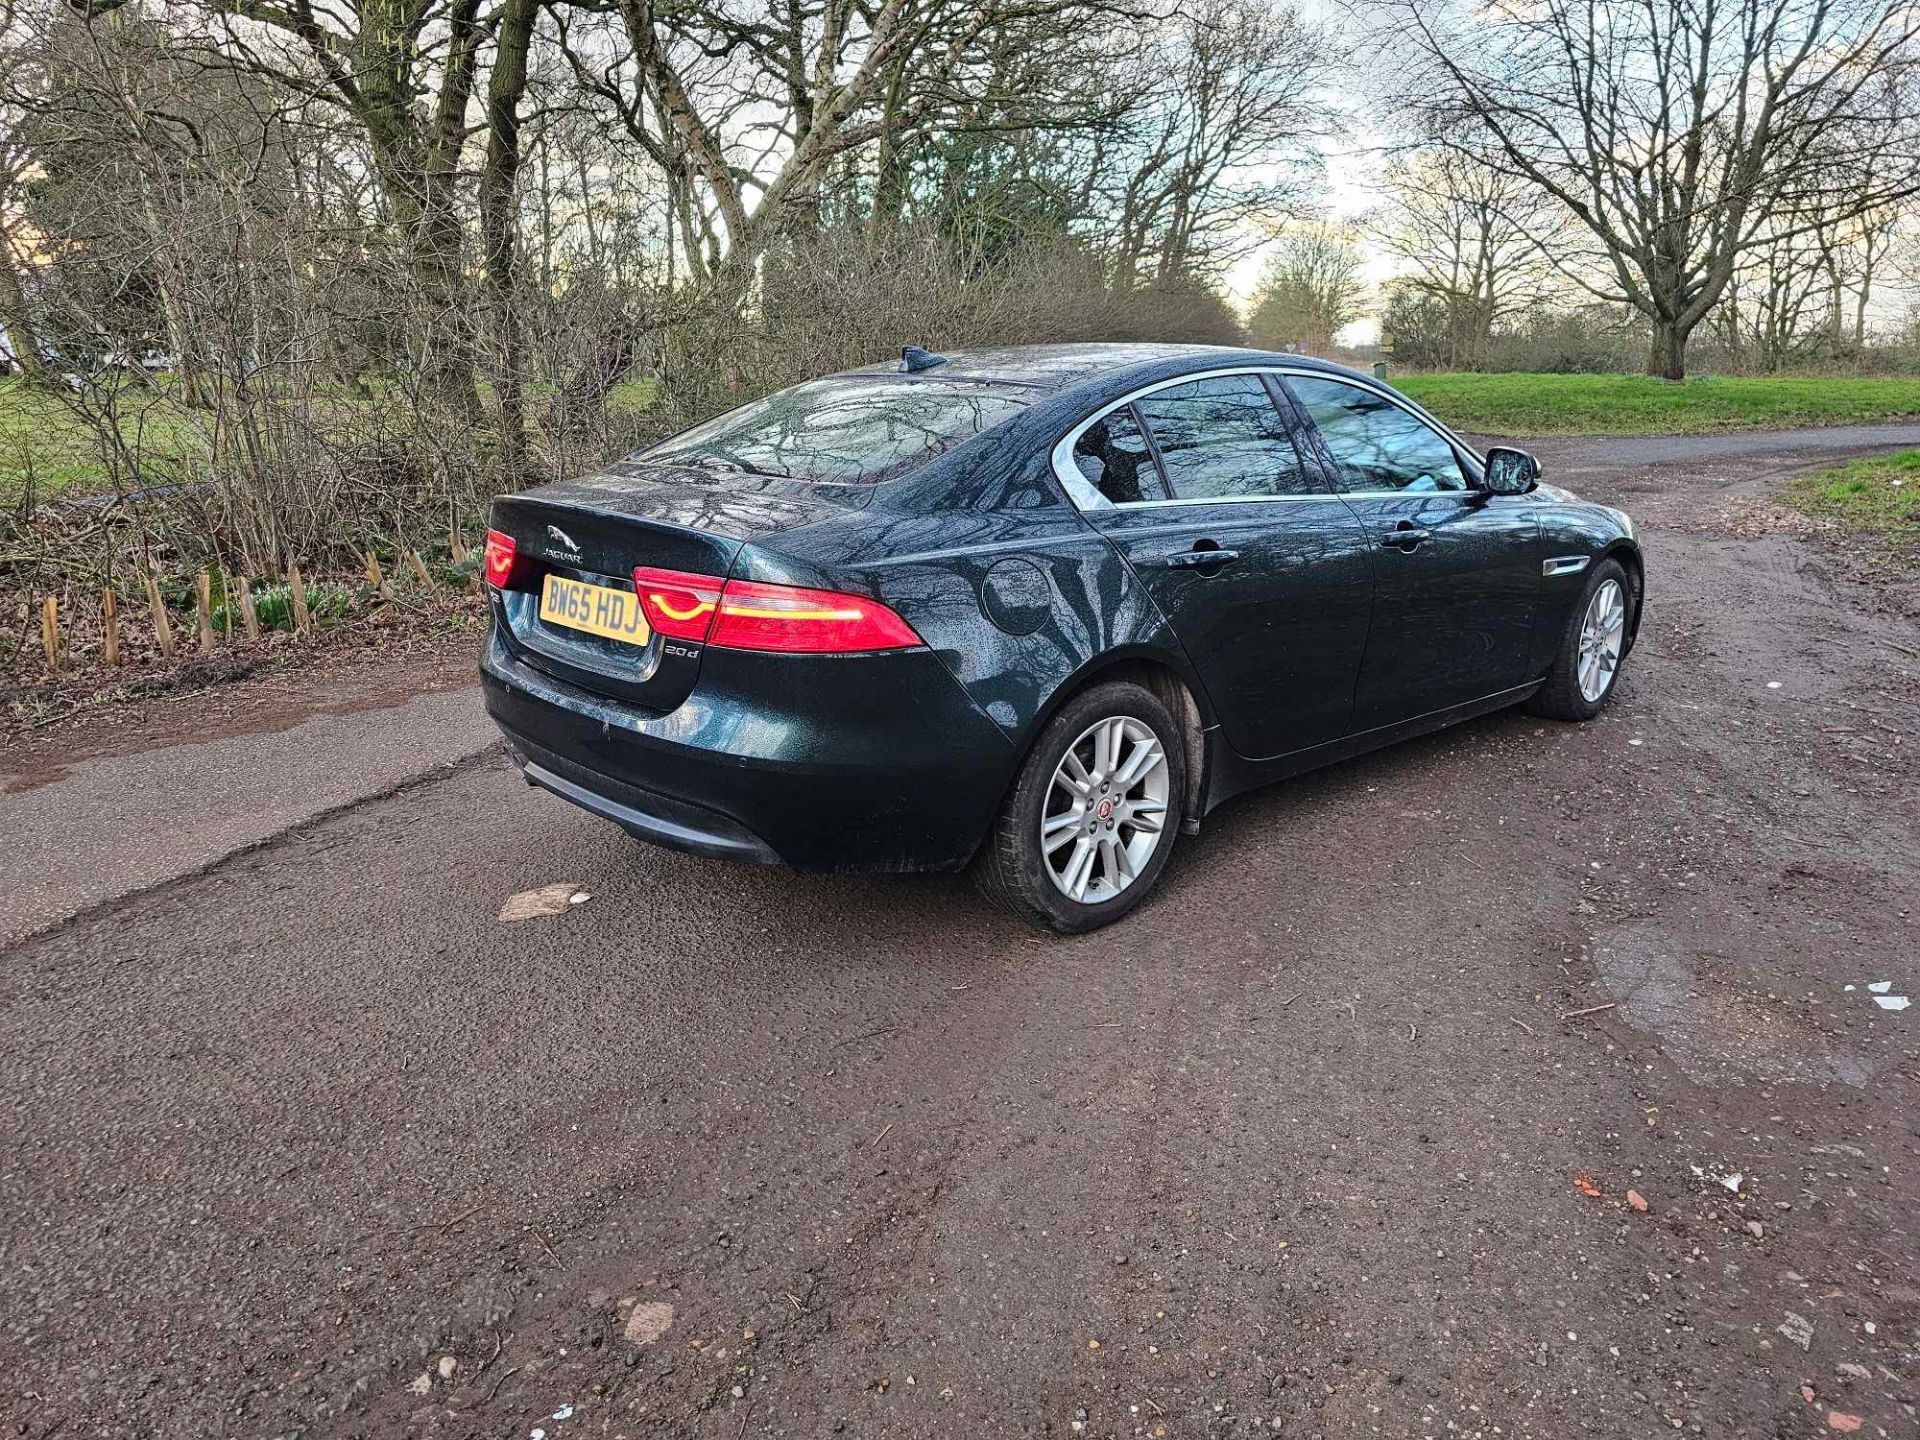 2015 65 JAGUAR XE SALOON - STARTS AND DRIVES BUT ENGINE IS NOISY - ALLOY WHEELS - 5 SERVICES. - Image 10 of 10